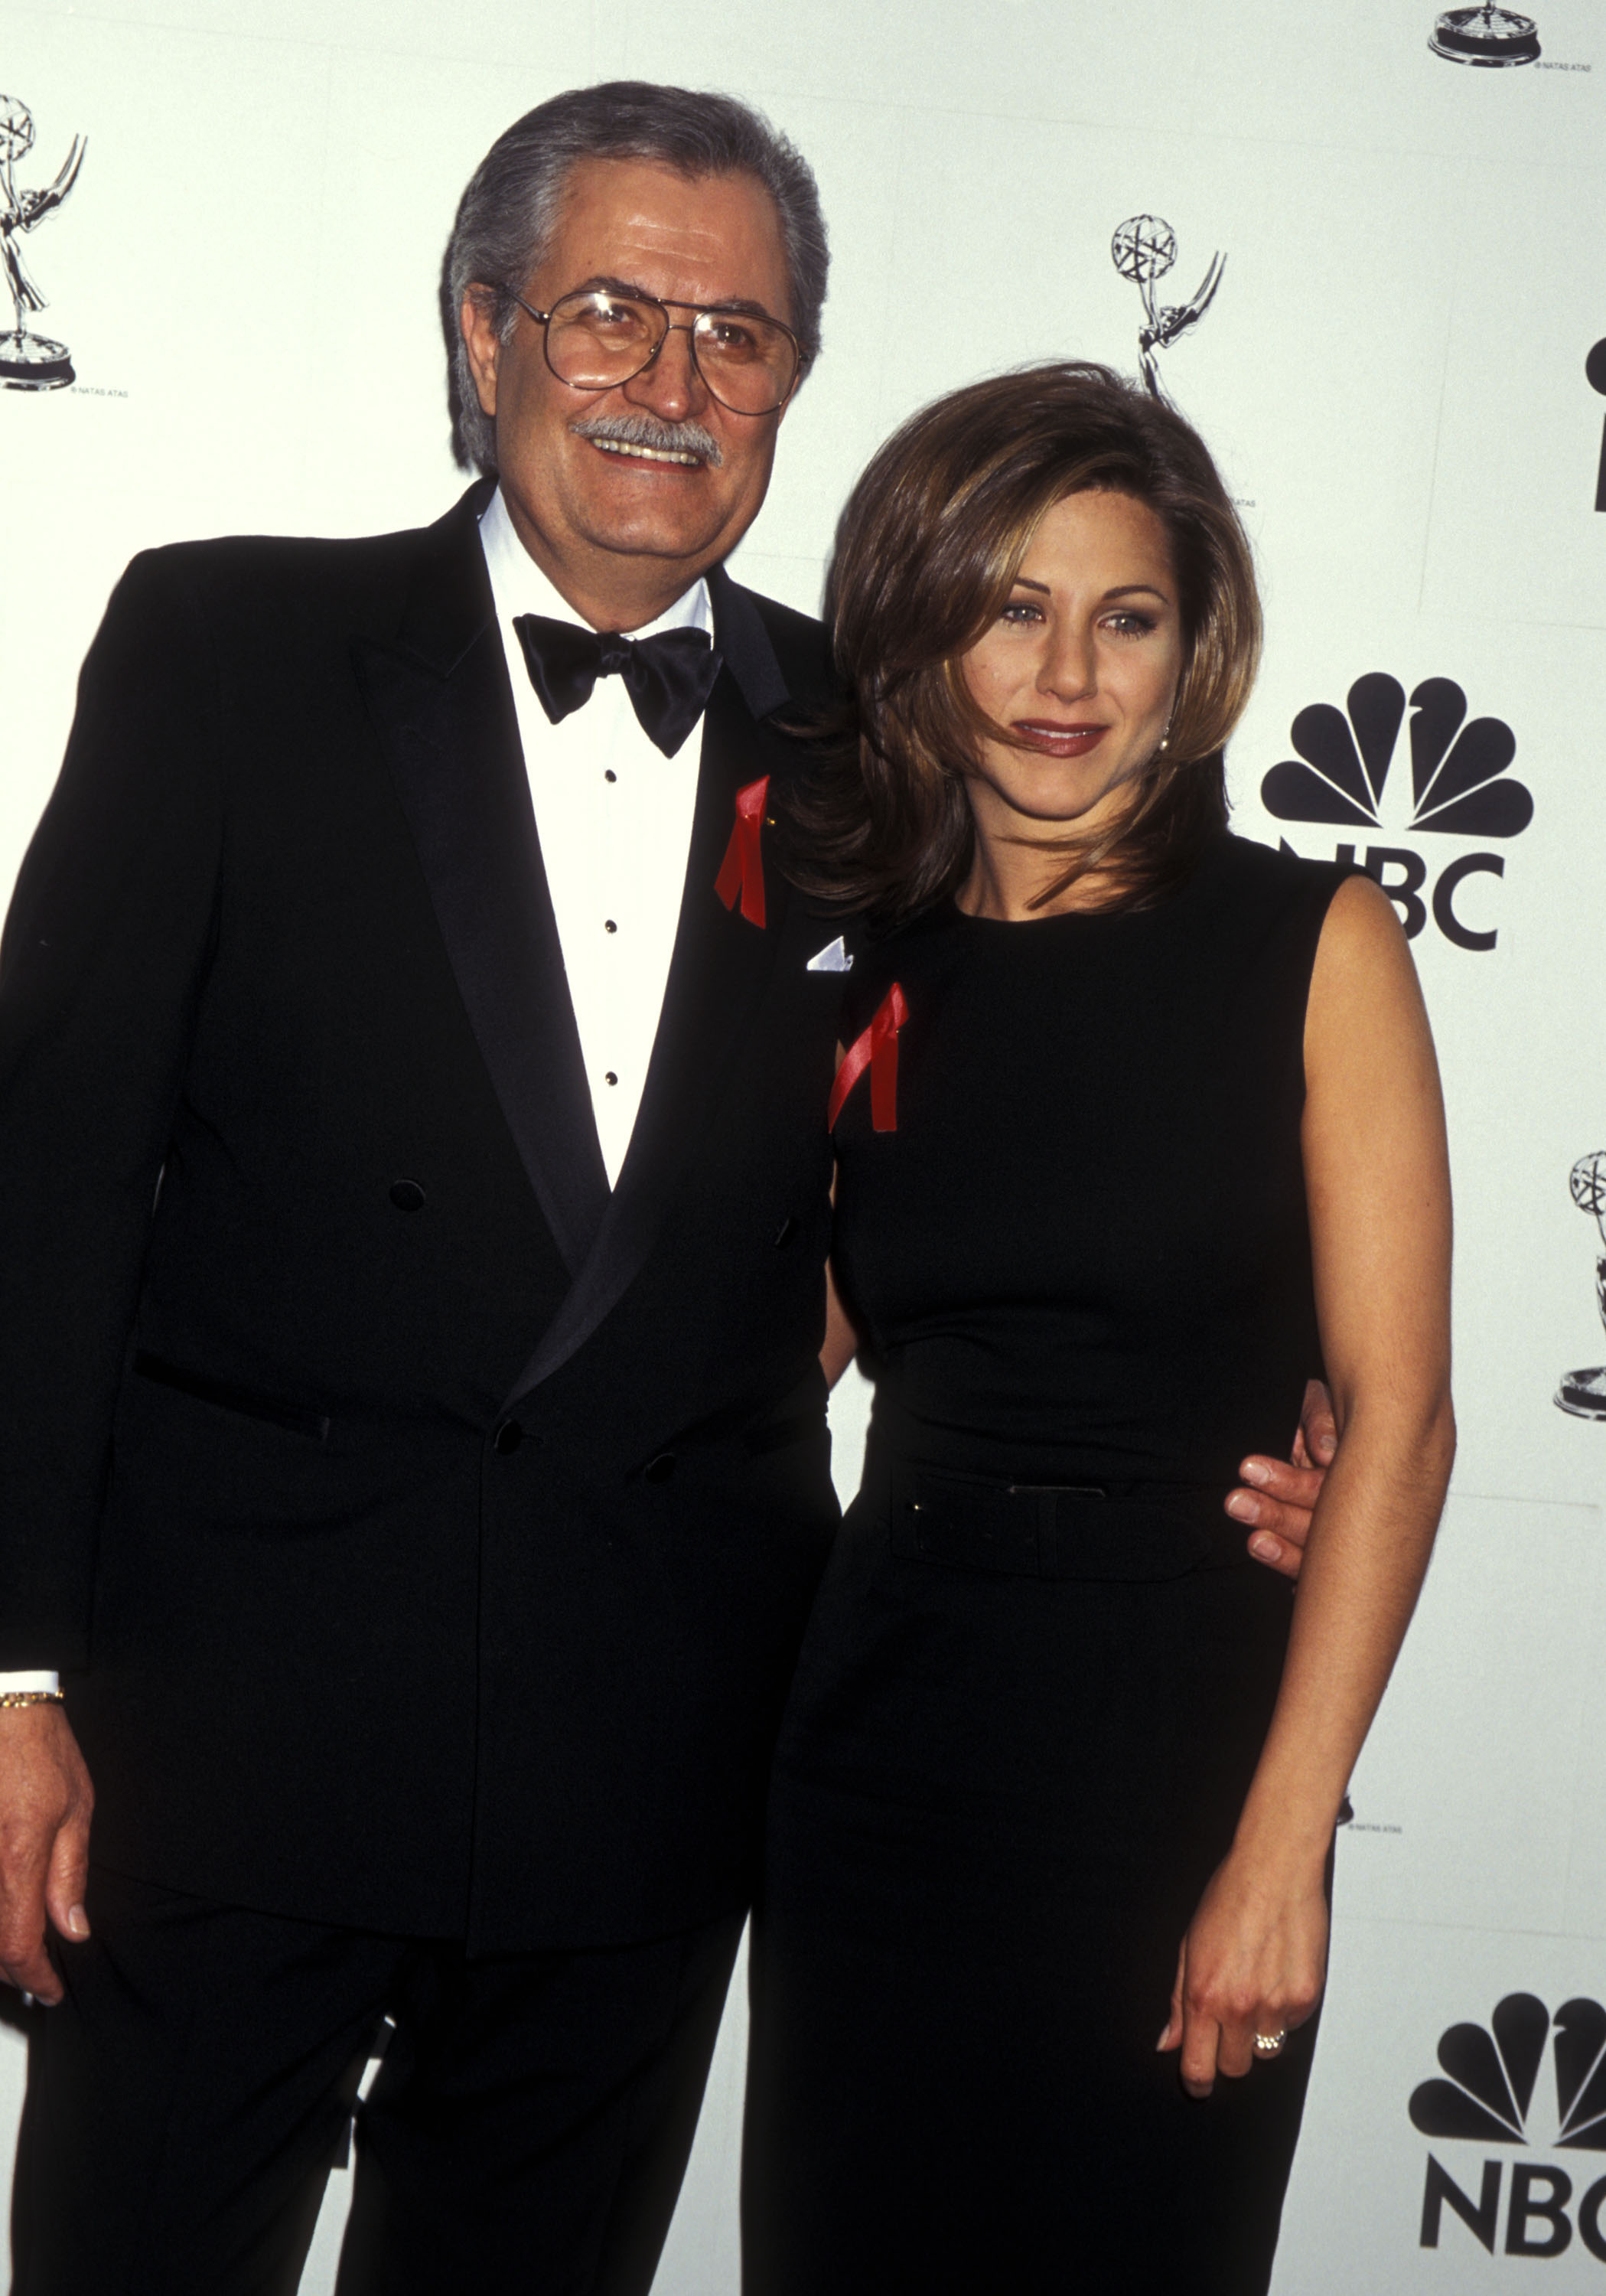 John and Jennifer Aniston at the 22nd Annual Daytime Emmy Awards in New York City on May 19, 1995 | Source: Getty Images